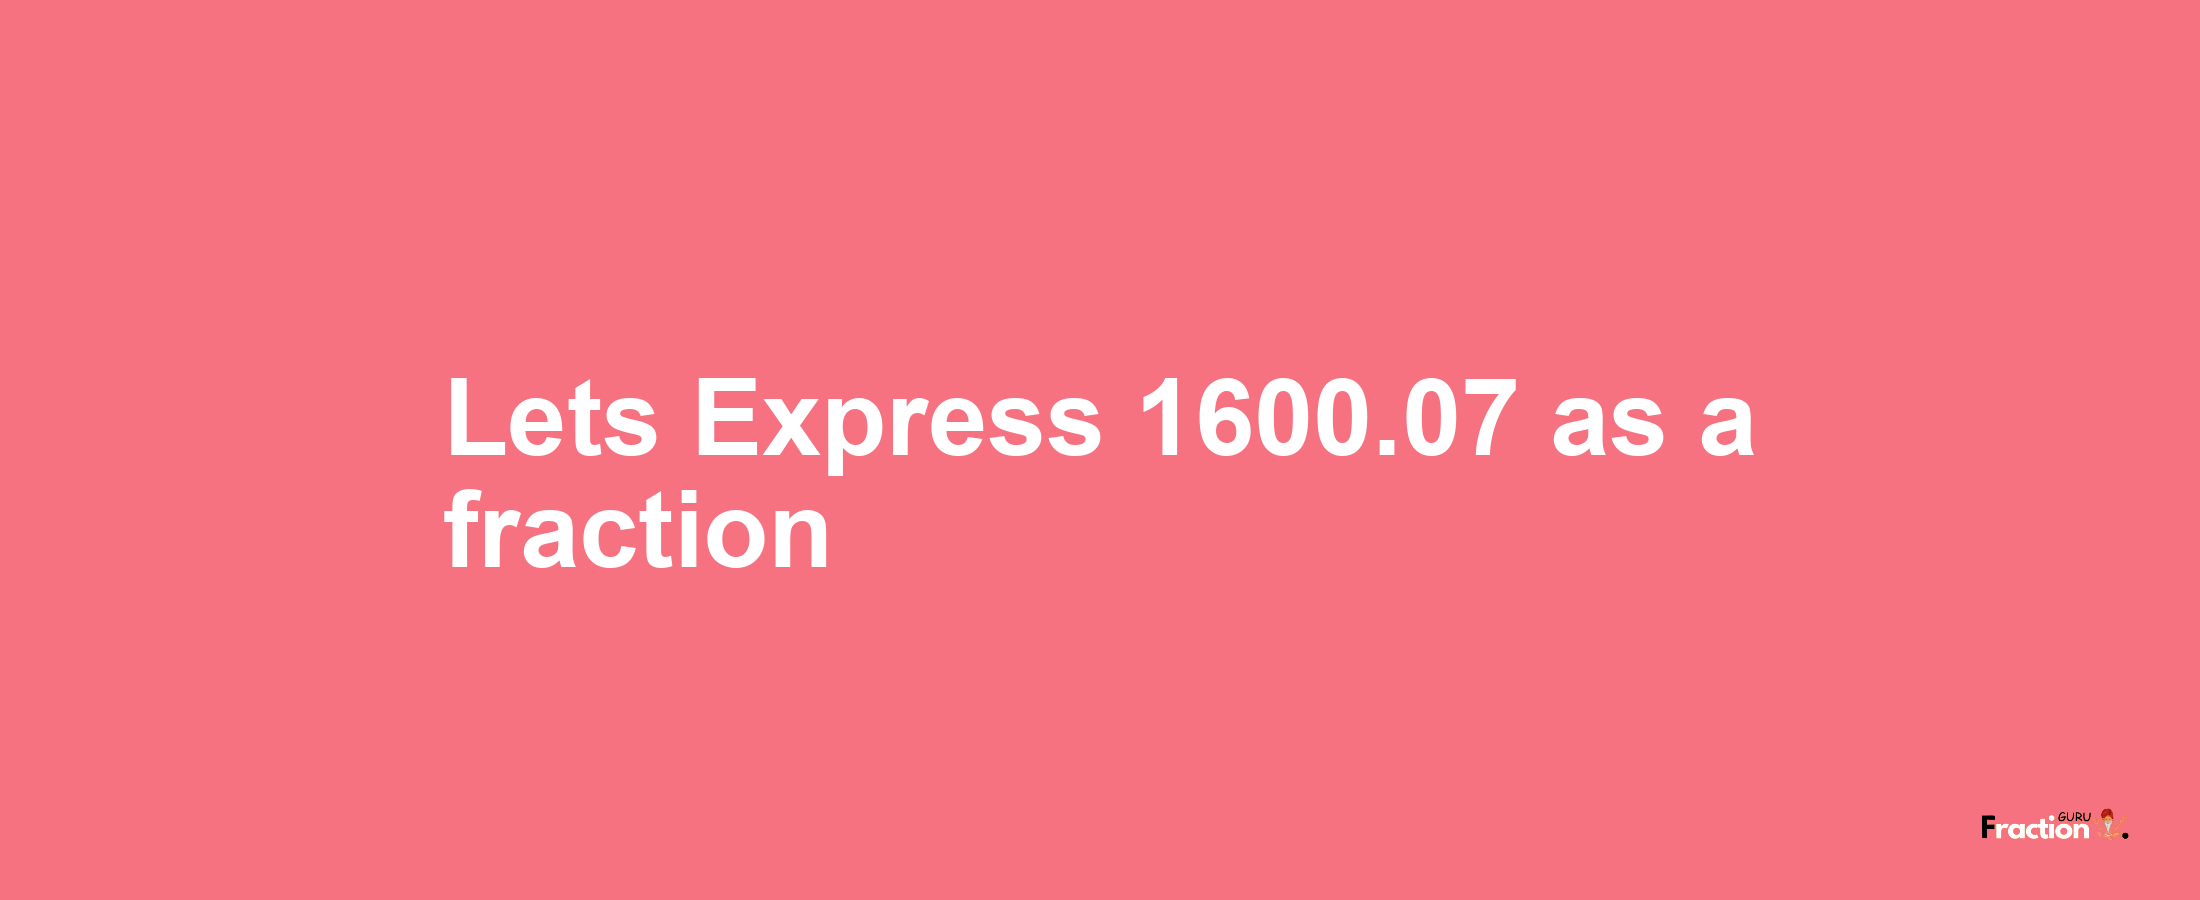 Lets Express 1600.07 as afraction